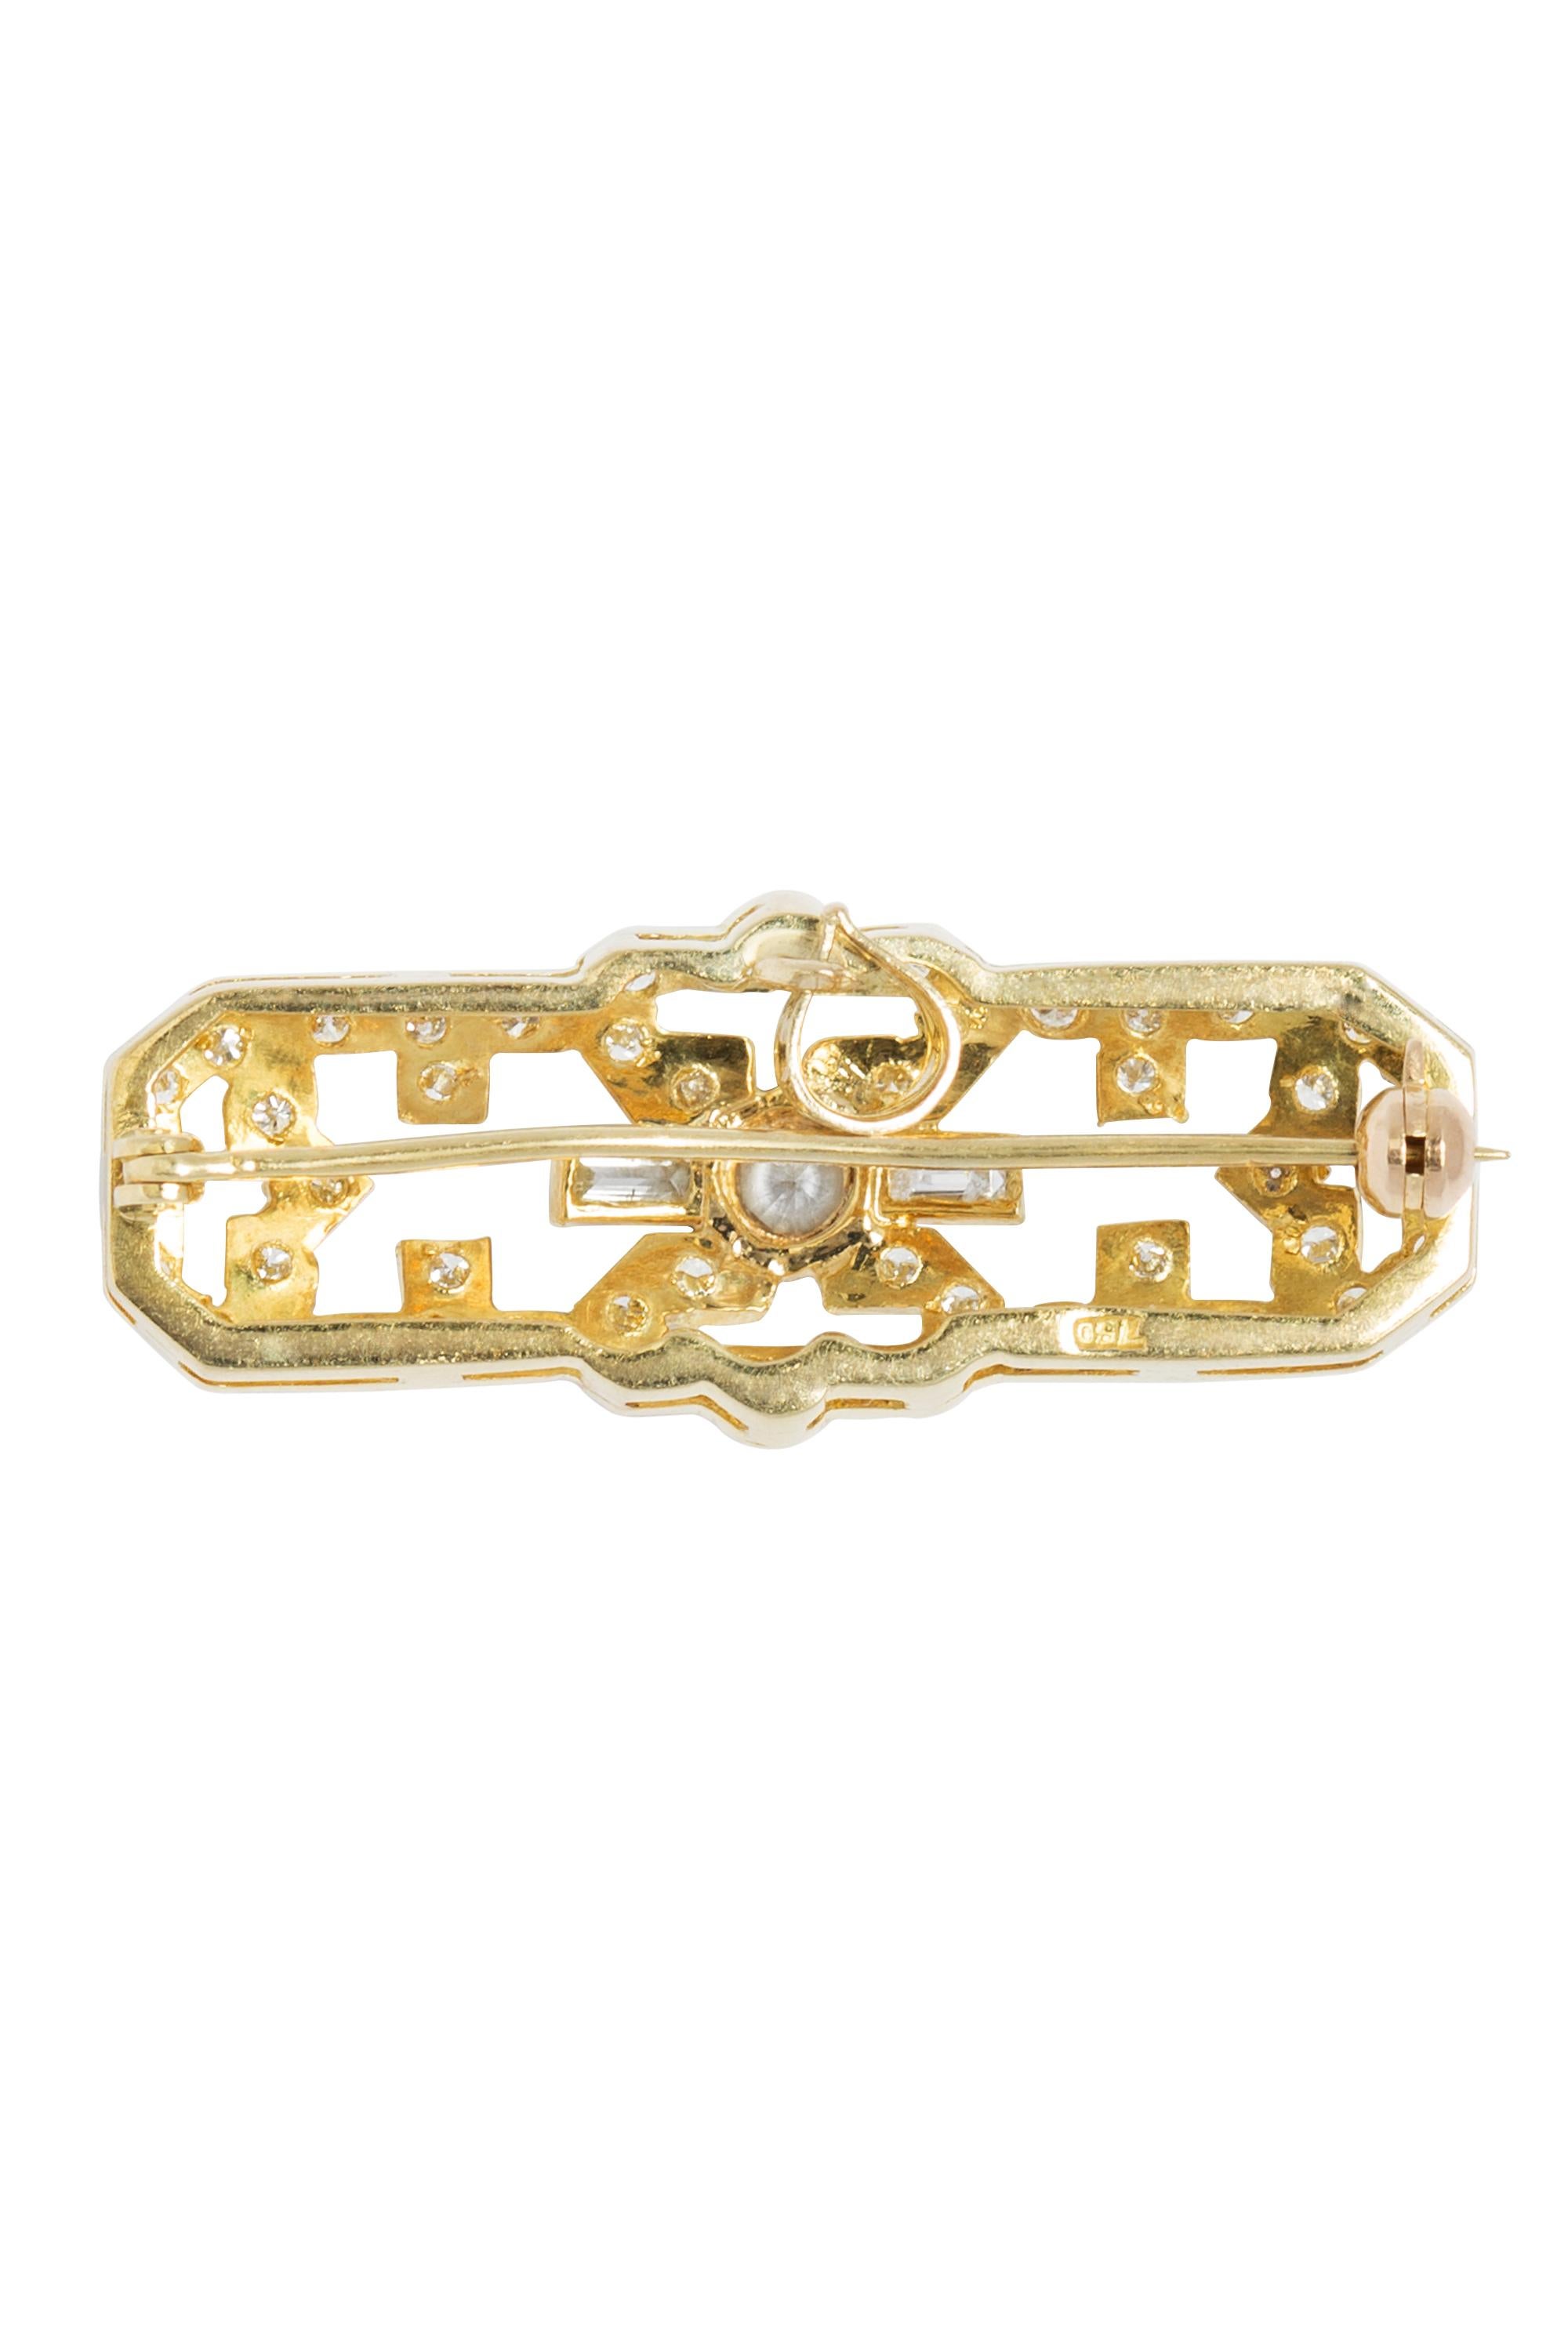 Round Cut Diamond and 18 Karat Yellow Gold Convertible Brooch For Sale